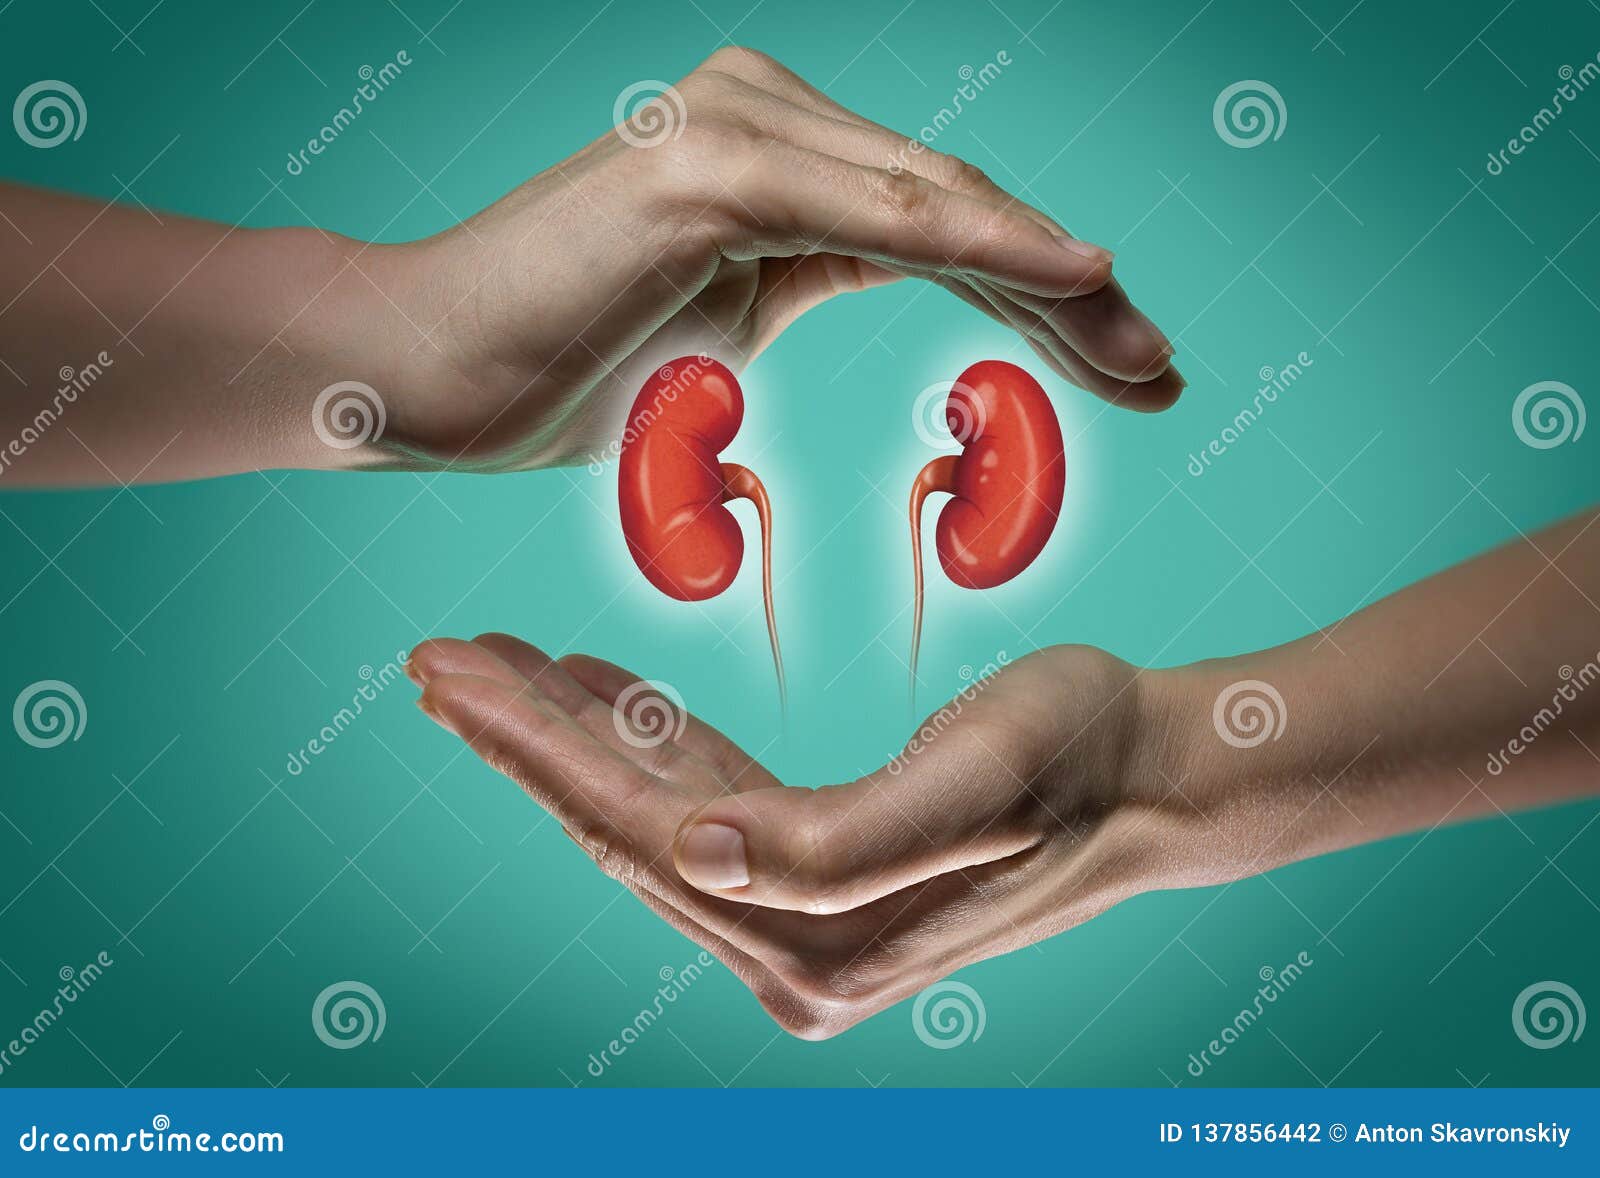 the concept of a healthy kidneys.